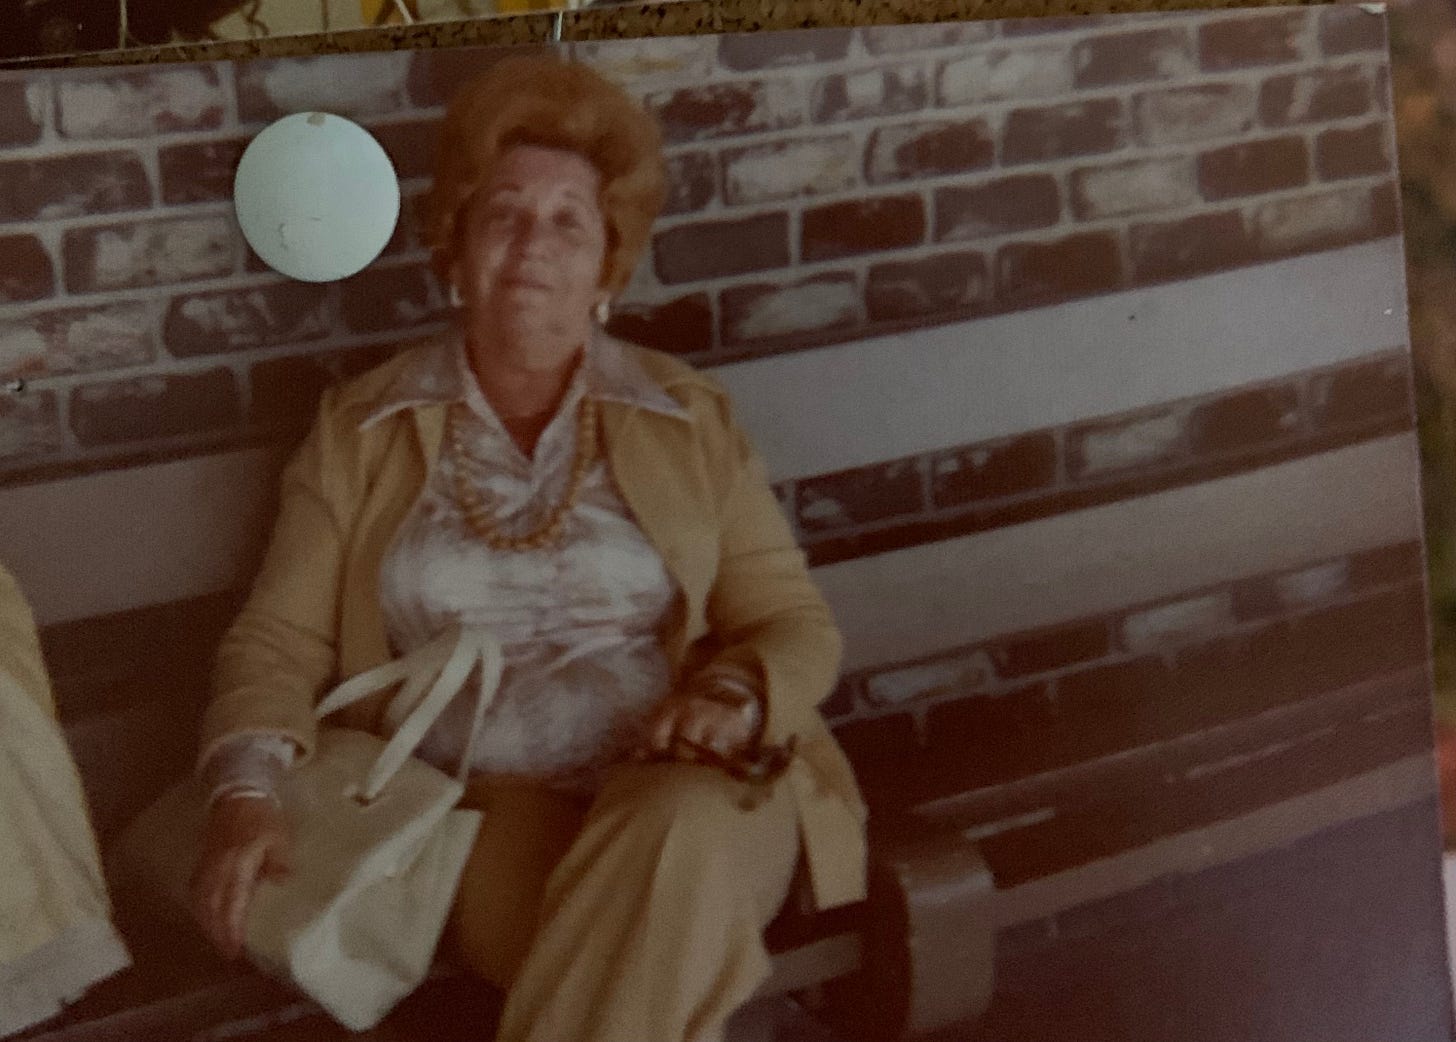 A badass Jewish woman with big hair sits on a bench